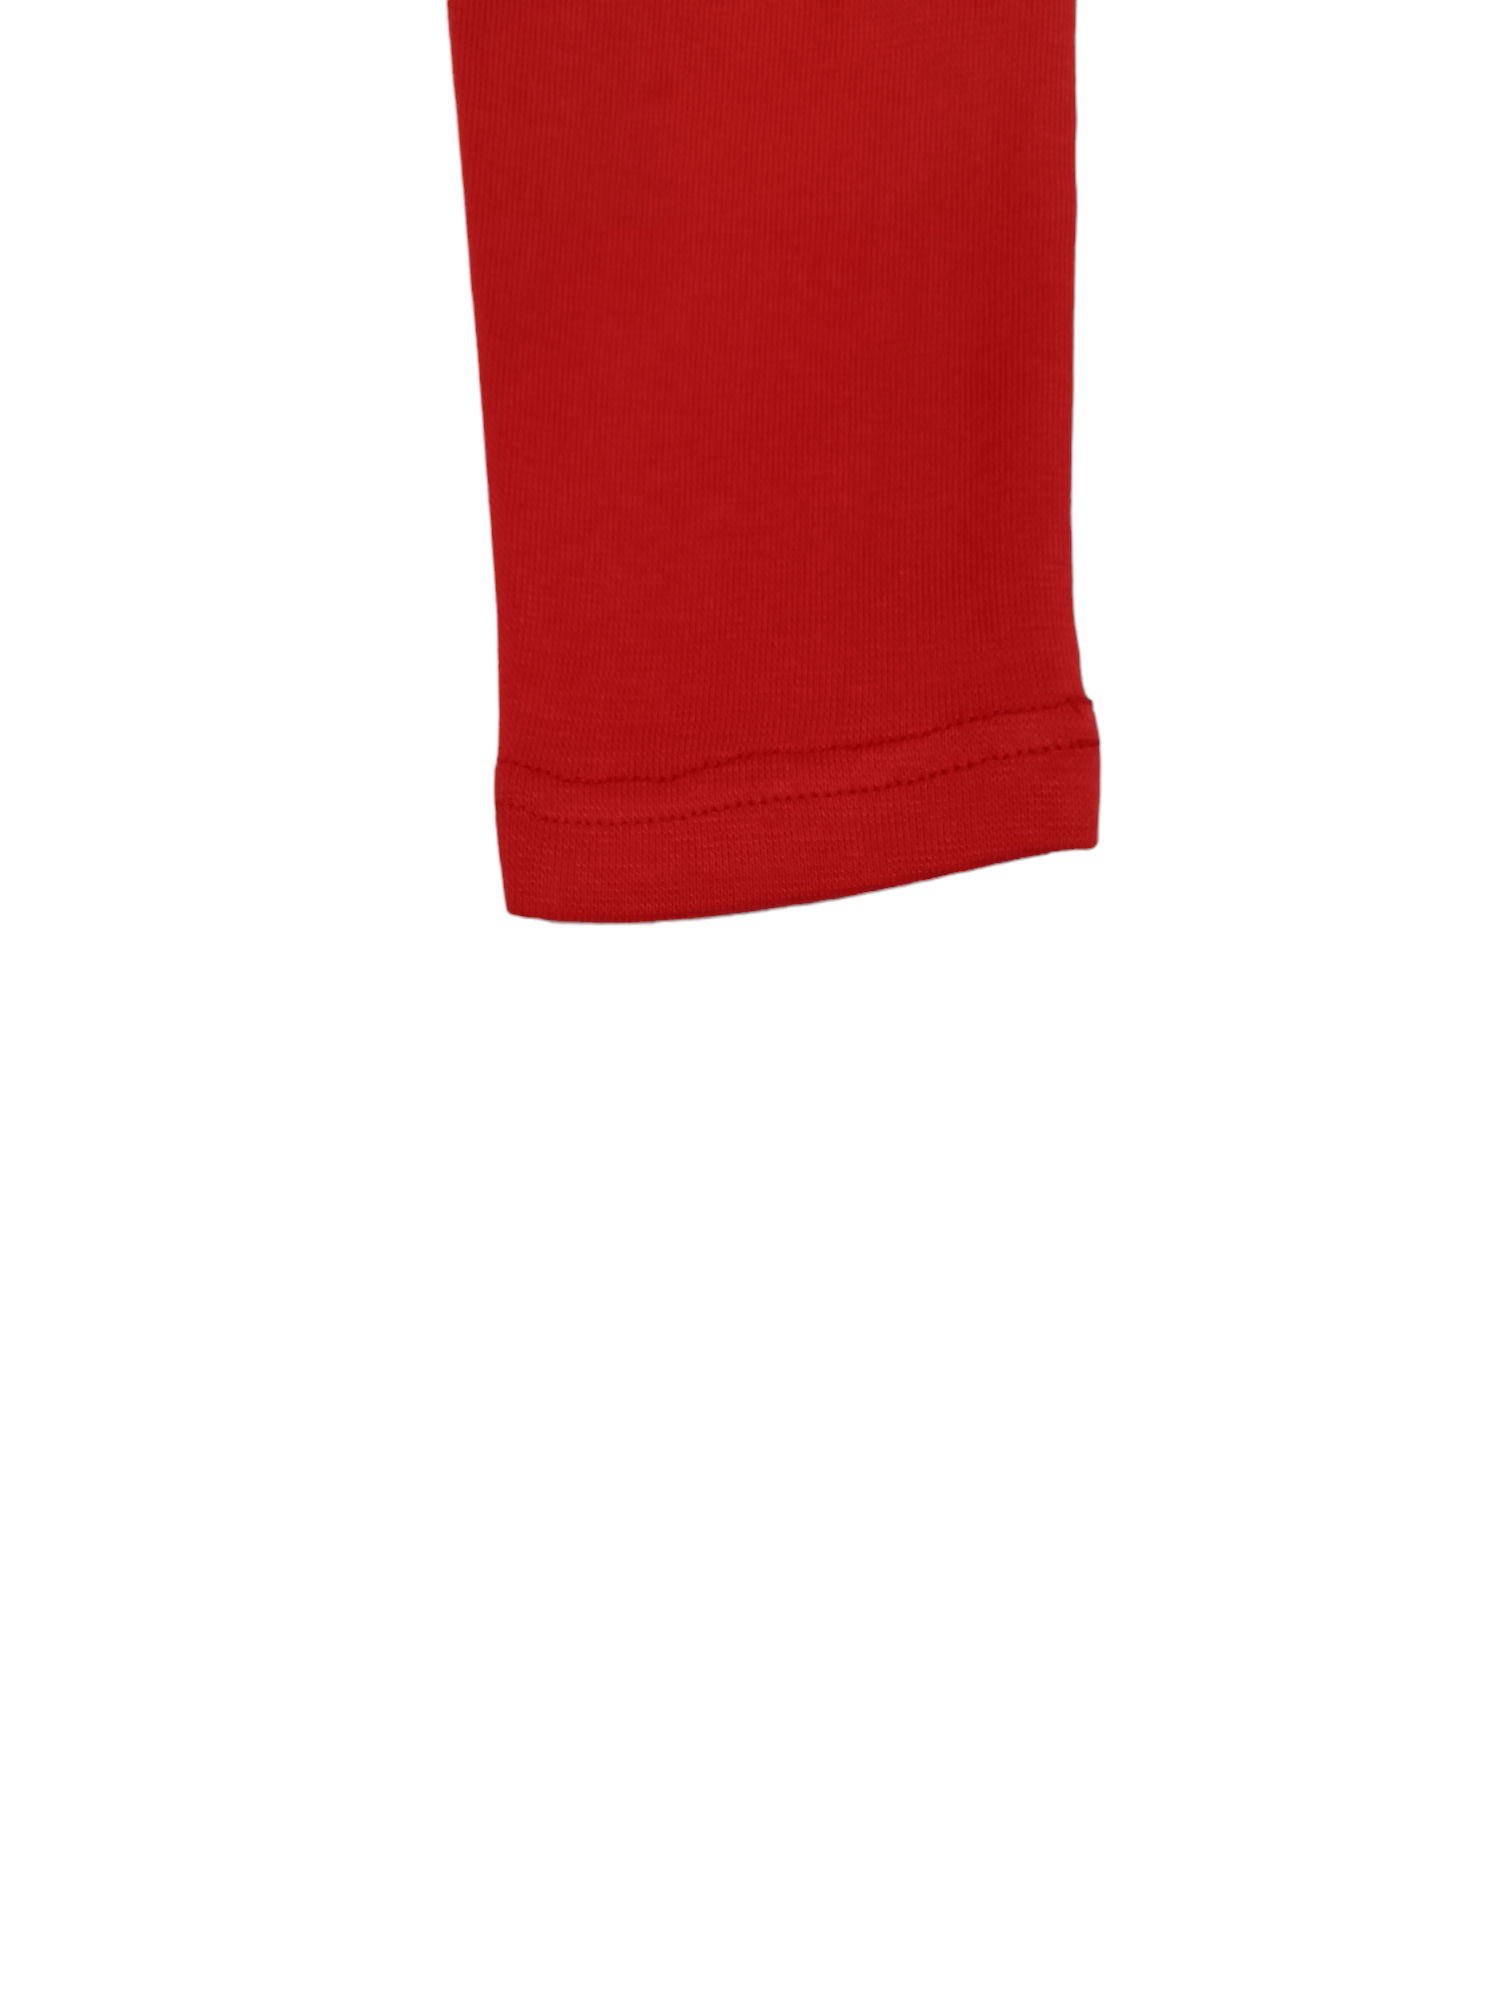 RED BASIC JERSEY TIGHT